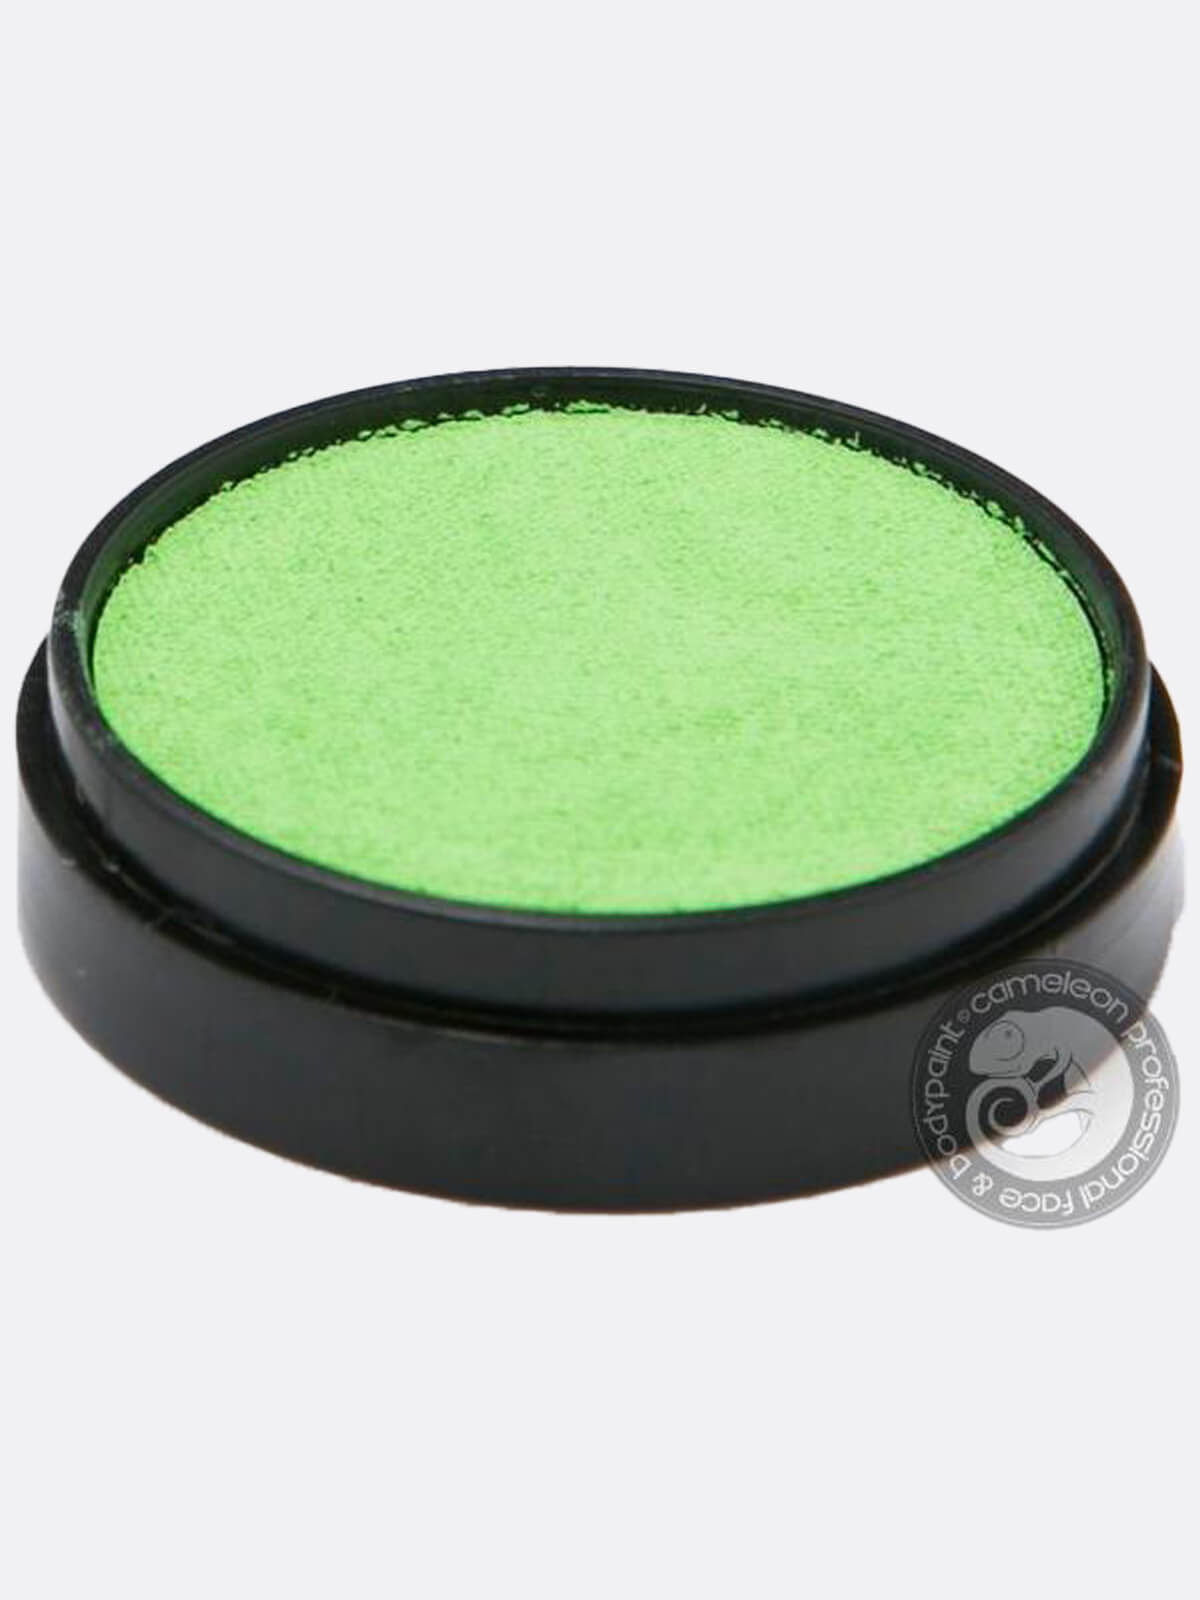 Wicked Green Face Paint by Cameleon